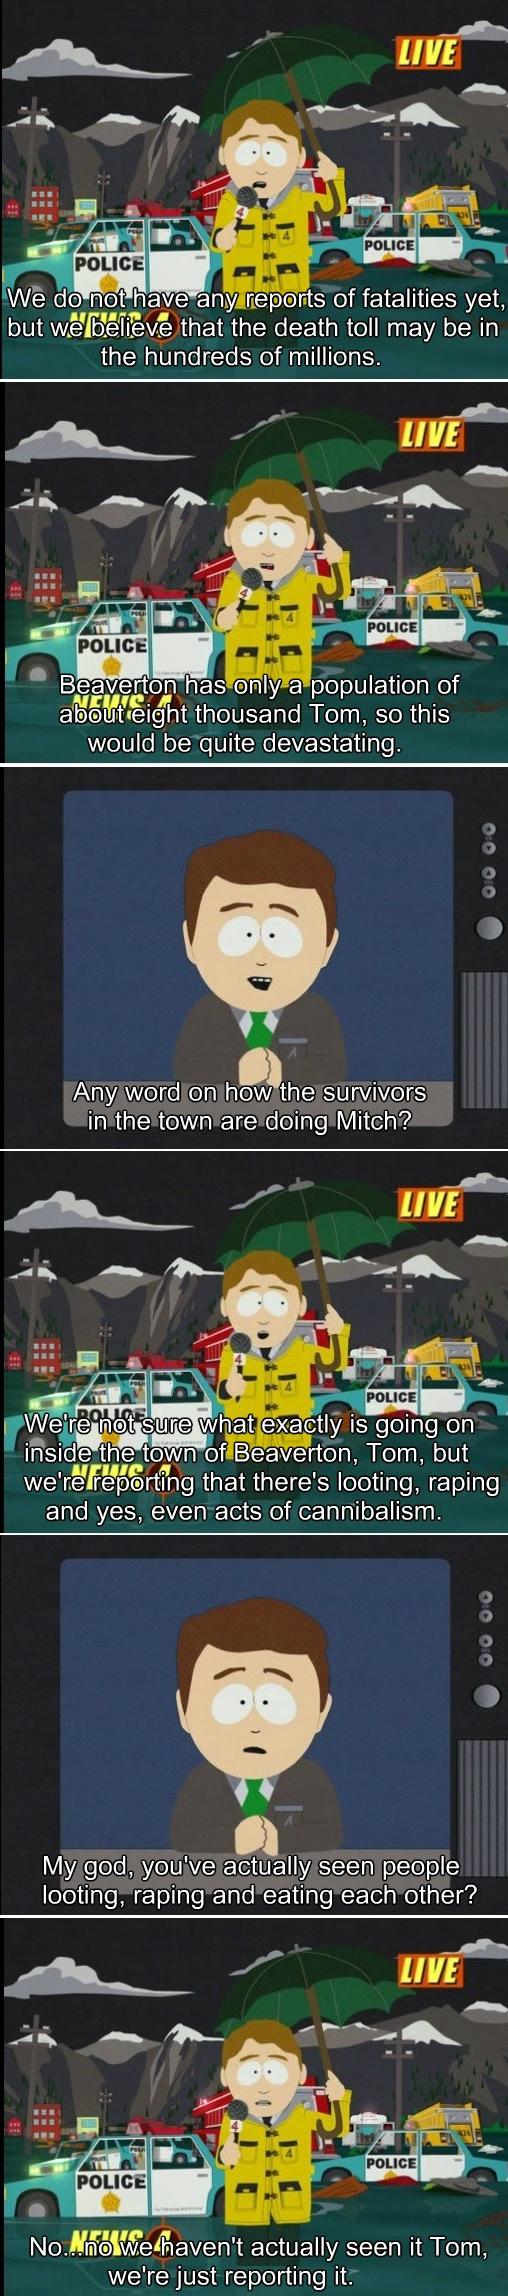 South Park's accurate depiction of broadcast journalism.